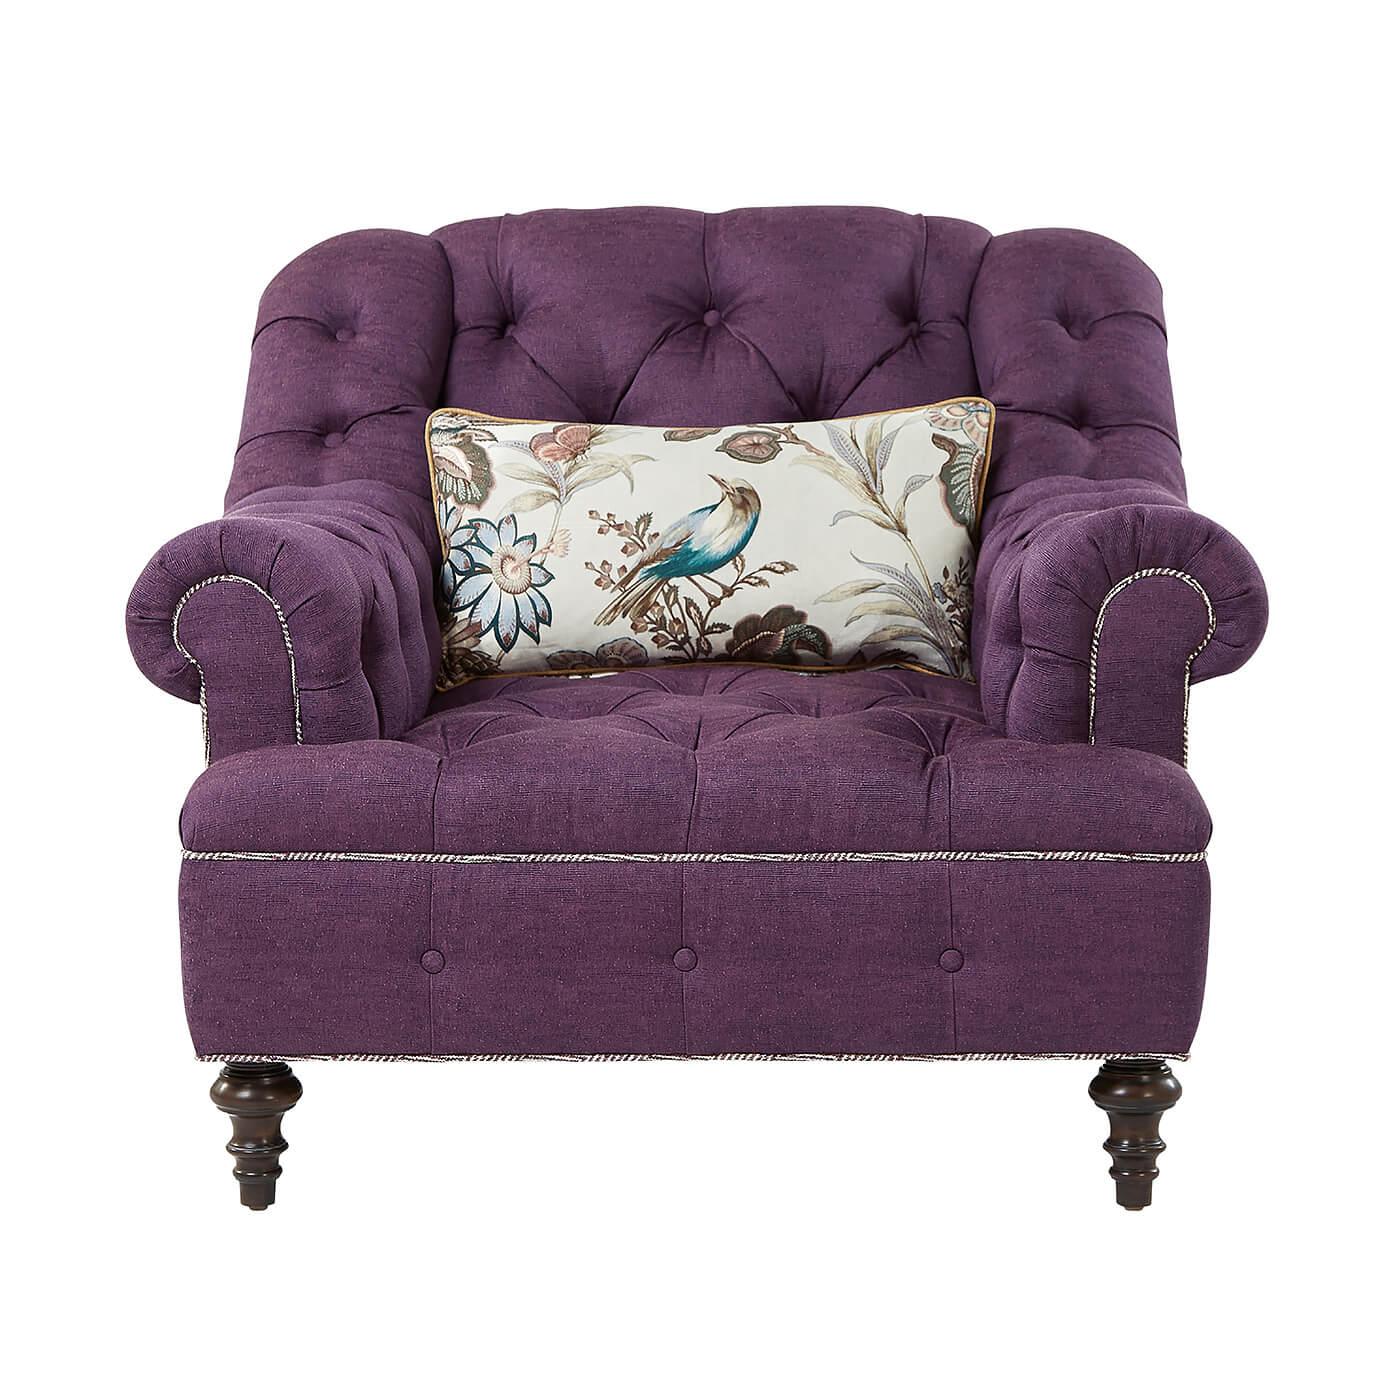 An English Classic tufted club chair. This chair has a Classic Silhouette and features all-over tufting. It has a tight tufted seat and back with soft scrolled arms and sits on turned wood feet. 

Shown in 1237-65 fabric
Shown in Cambridge